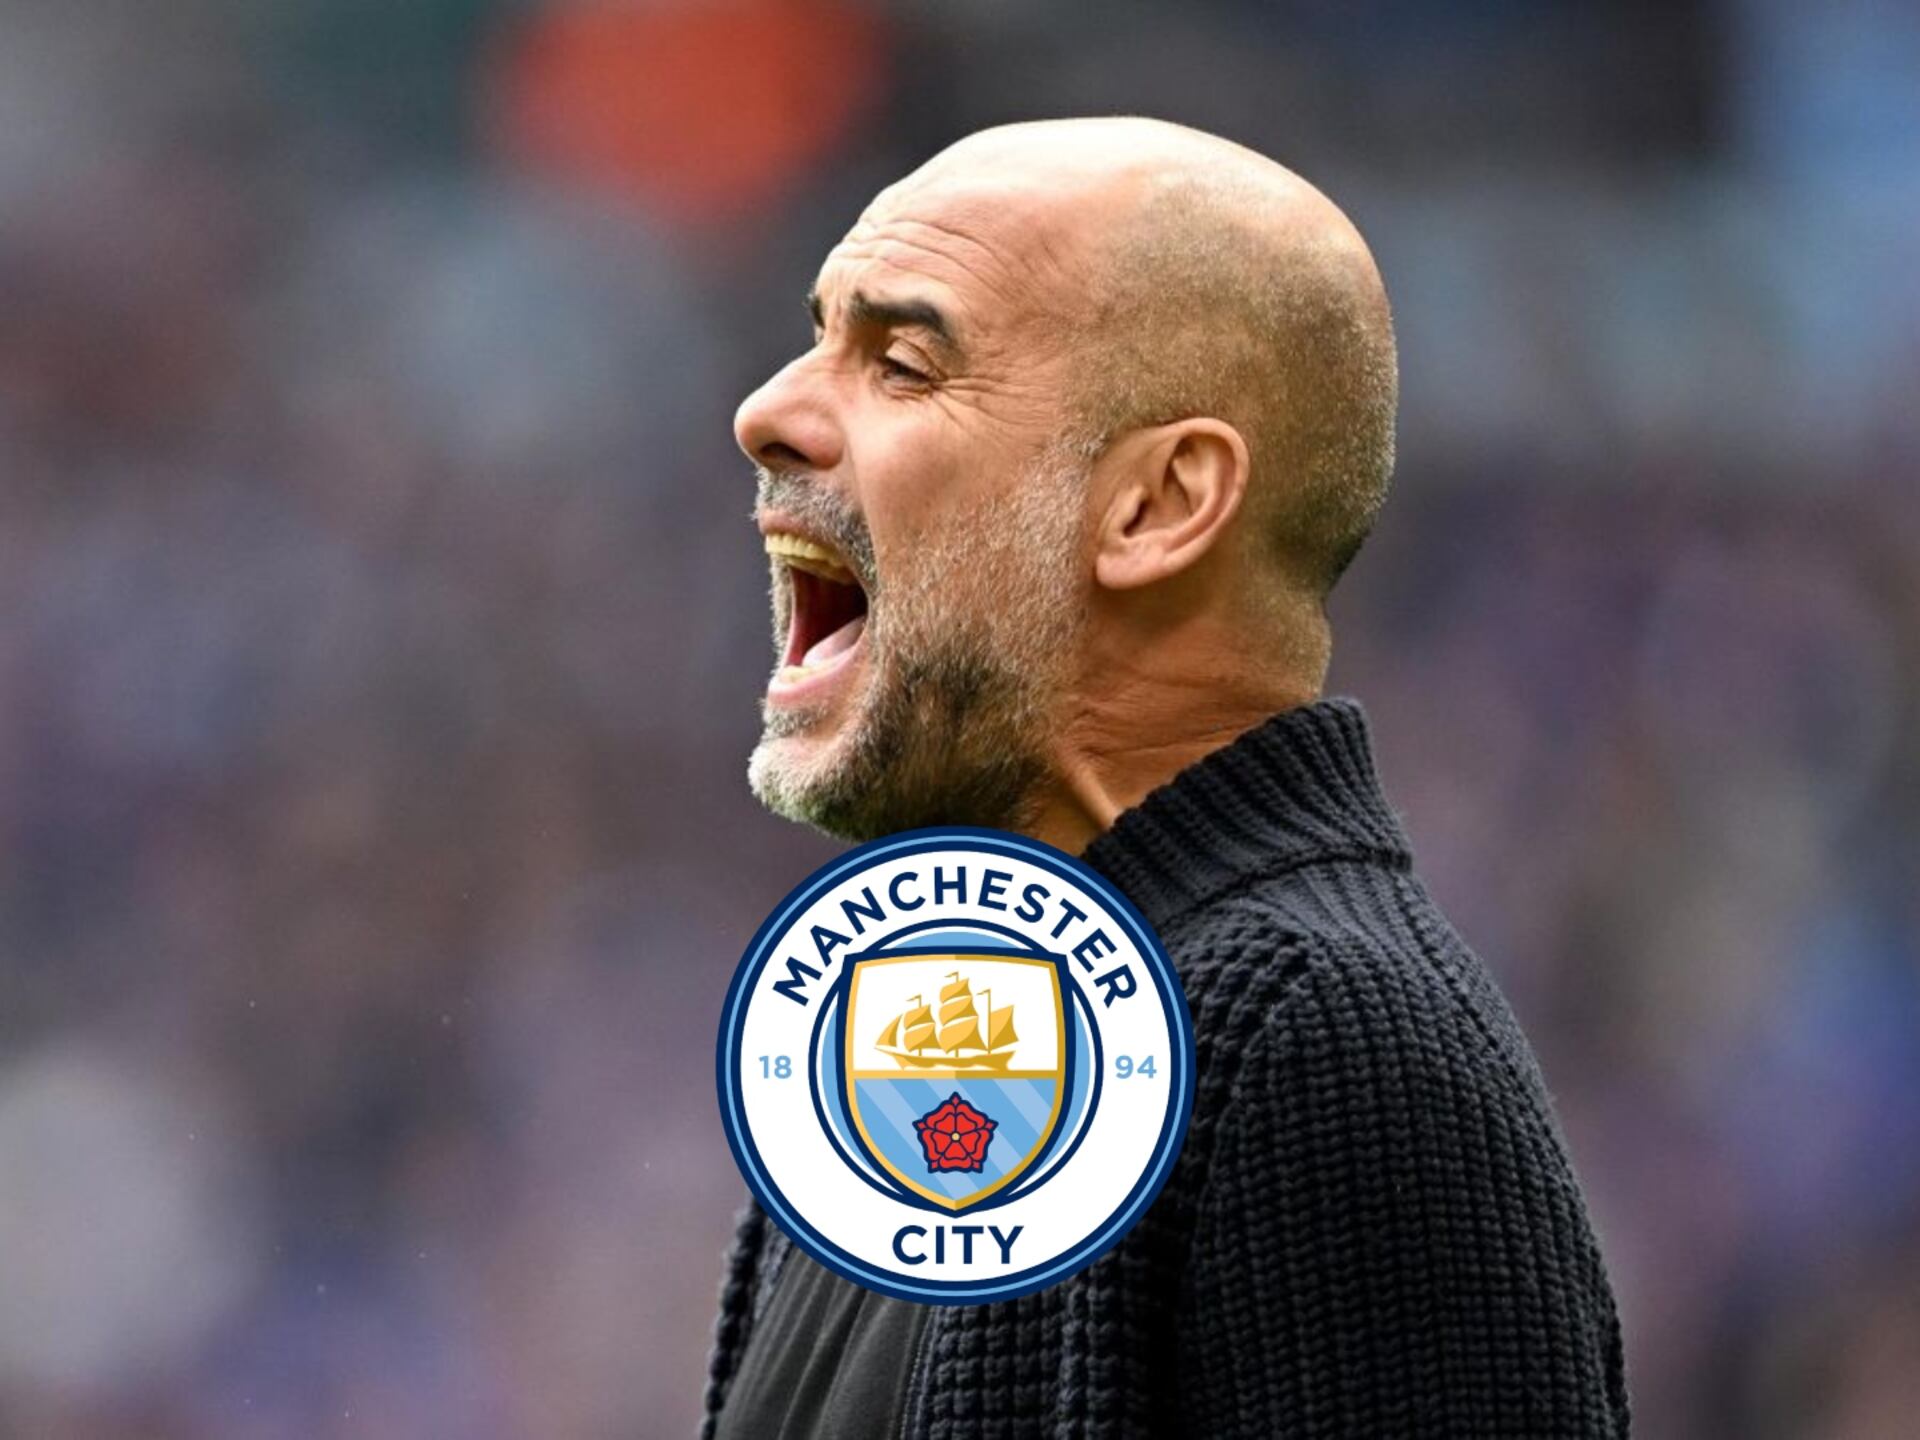 (VIDEO) The controversy in which Guardiola's City eliminate Chelsea from the FA Cup